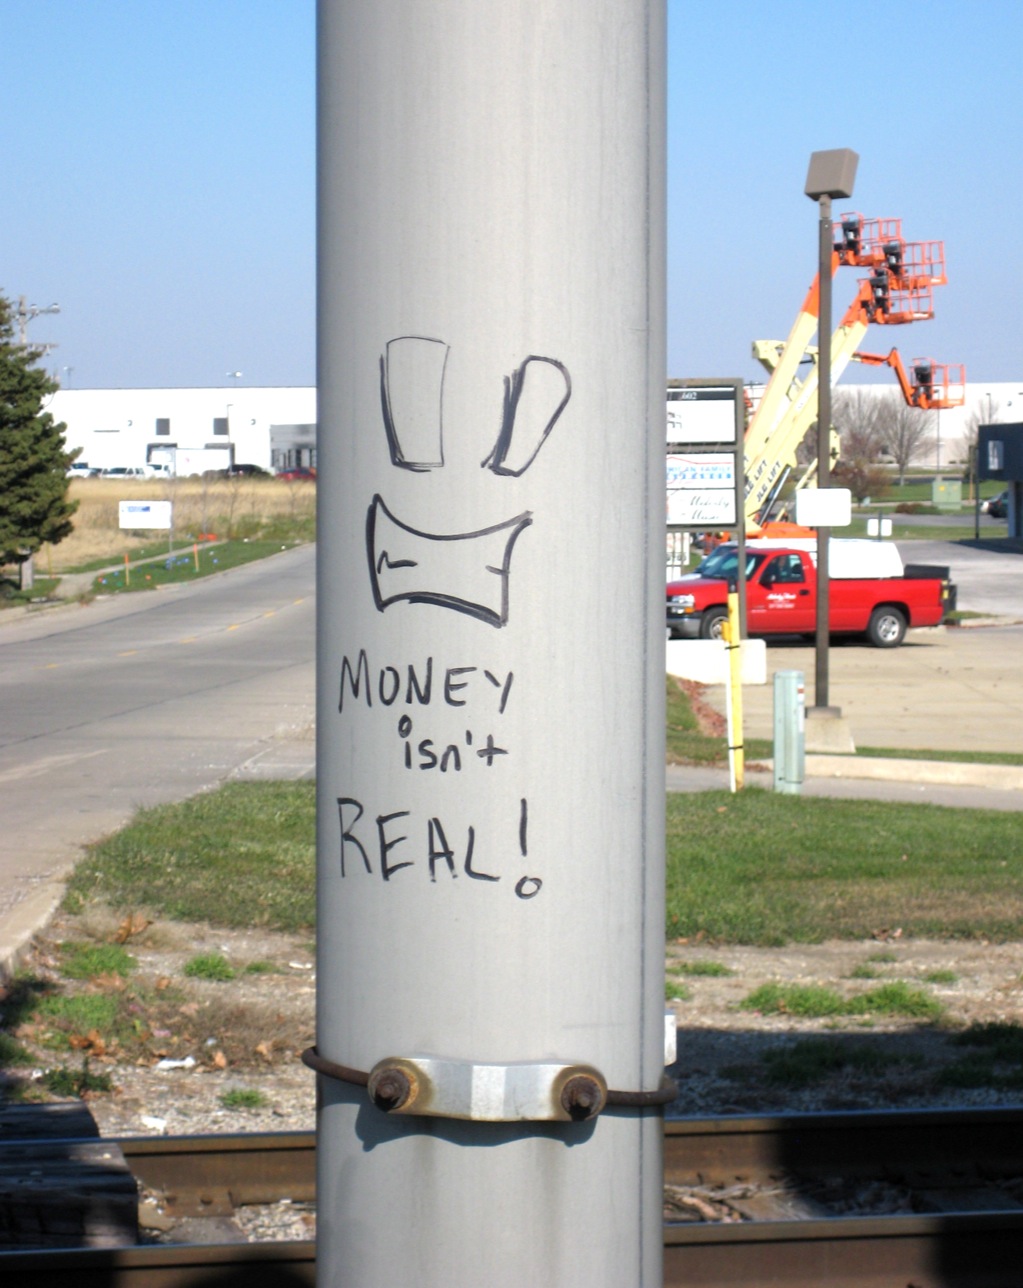 graffiti on a pole with a house in the background